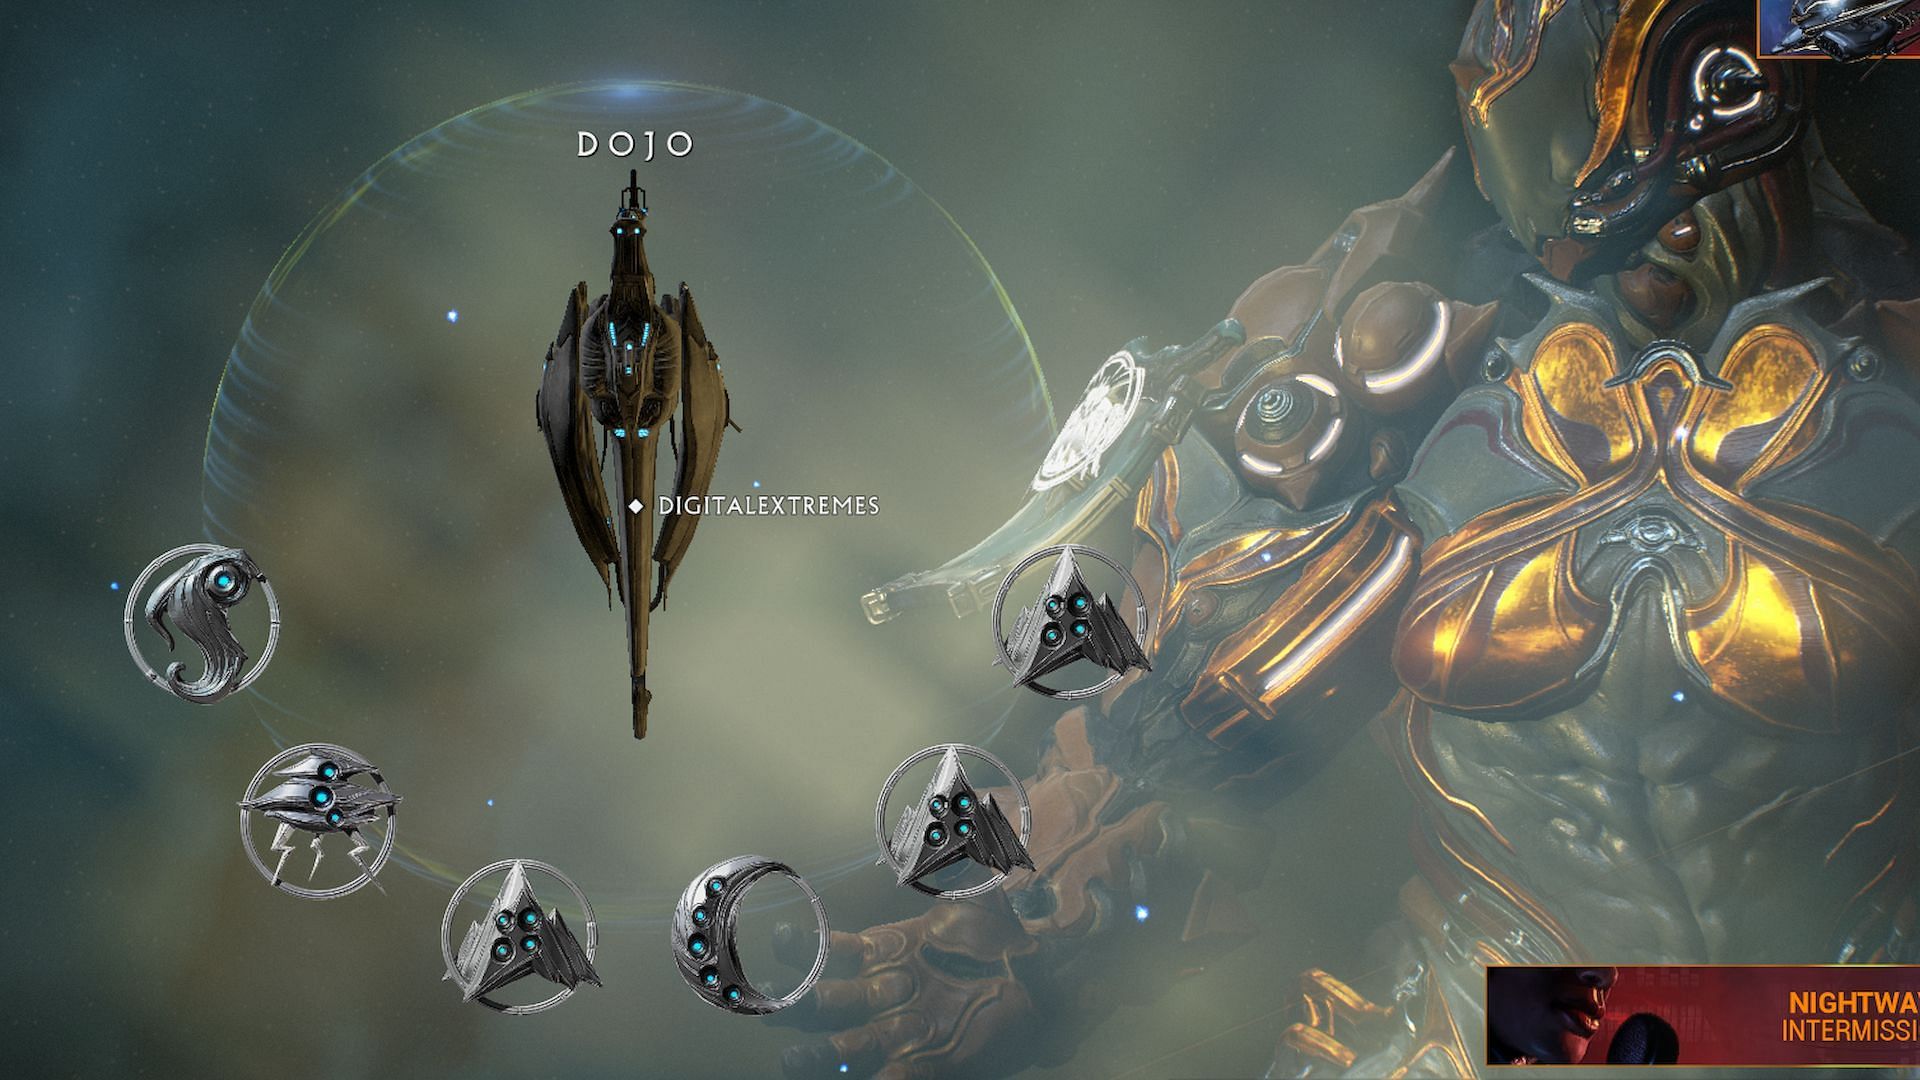 You must join or have a clan to access Dojo (Image via Warframe)